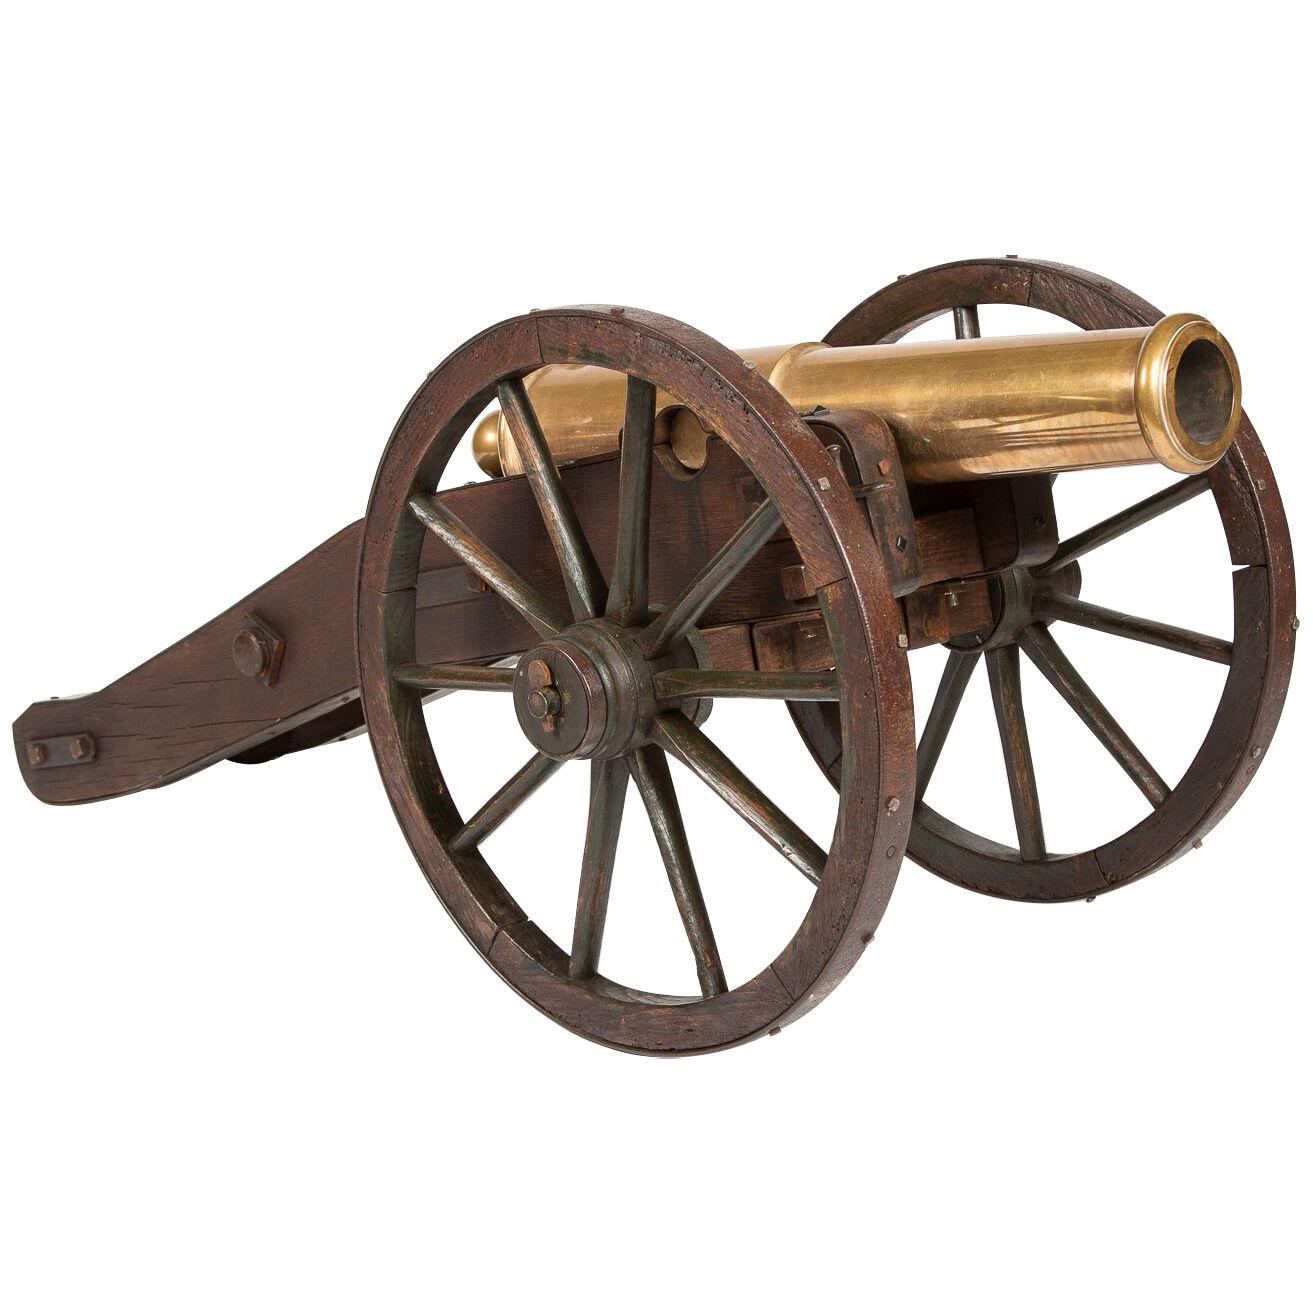 A late 19th century French mountain cannon.